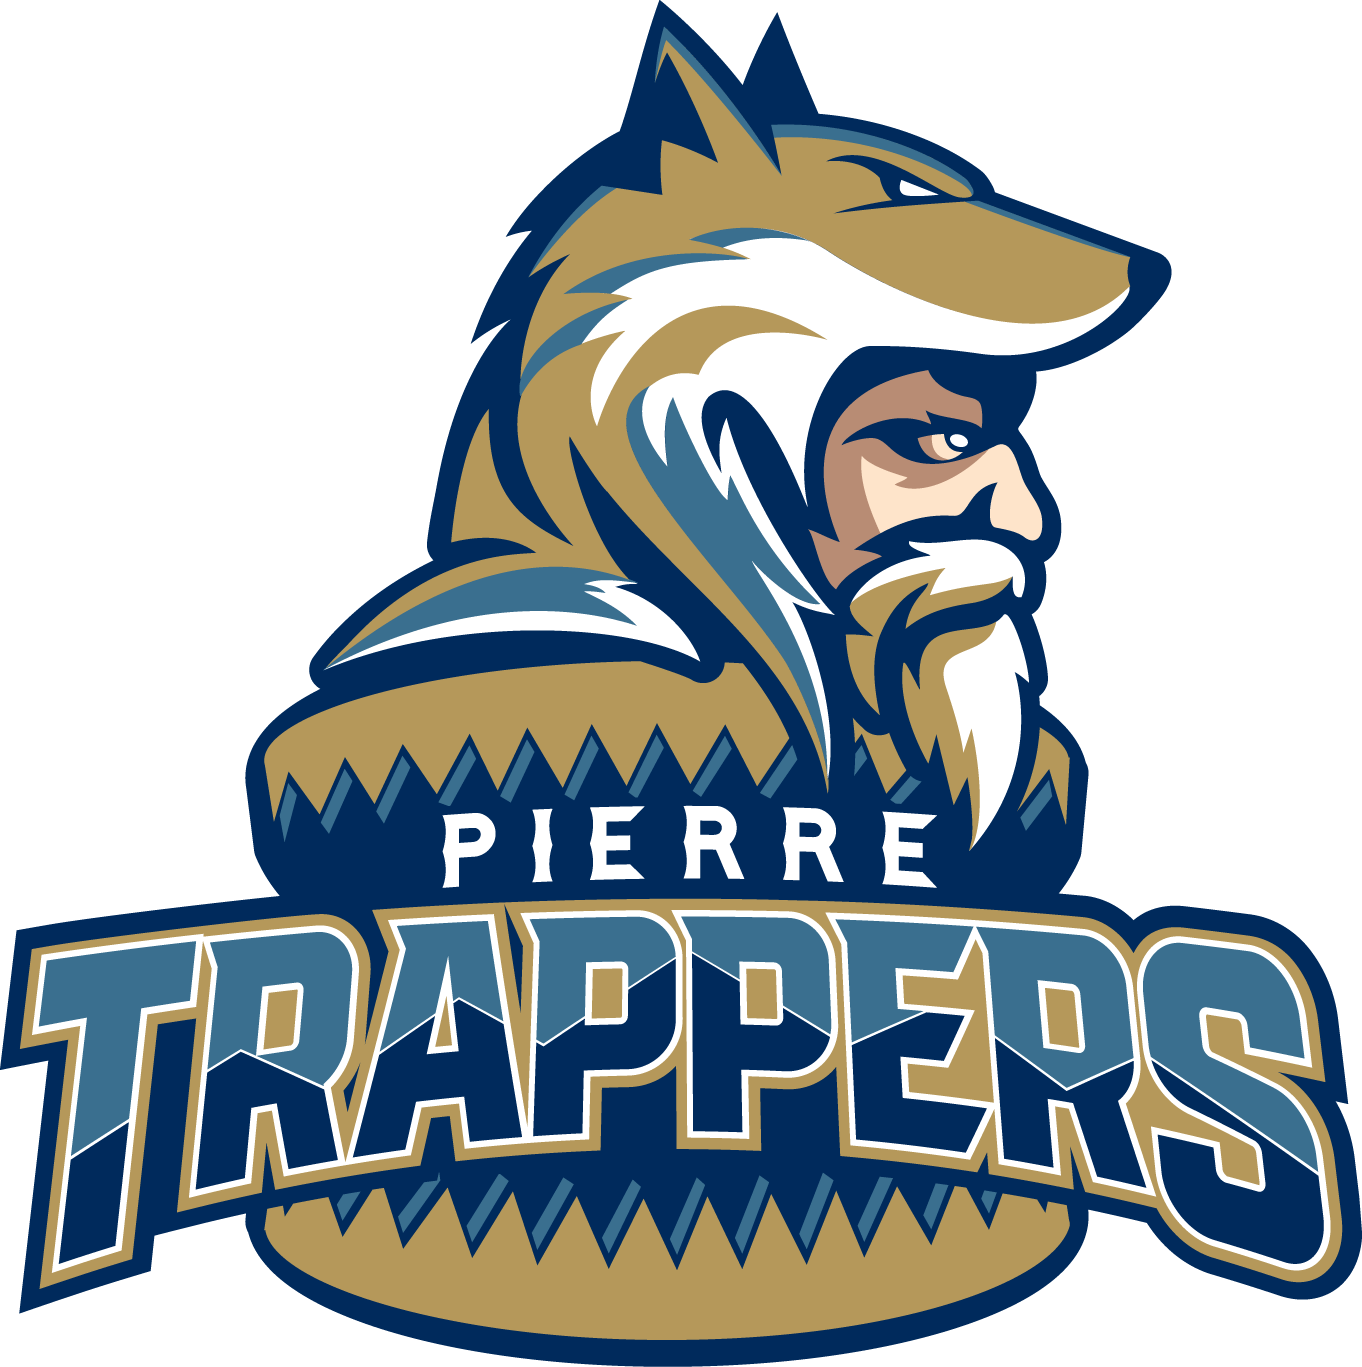 Trappers Logo - Pierre Trappers Ticket Portal